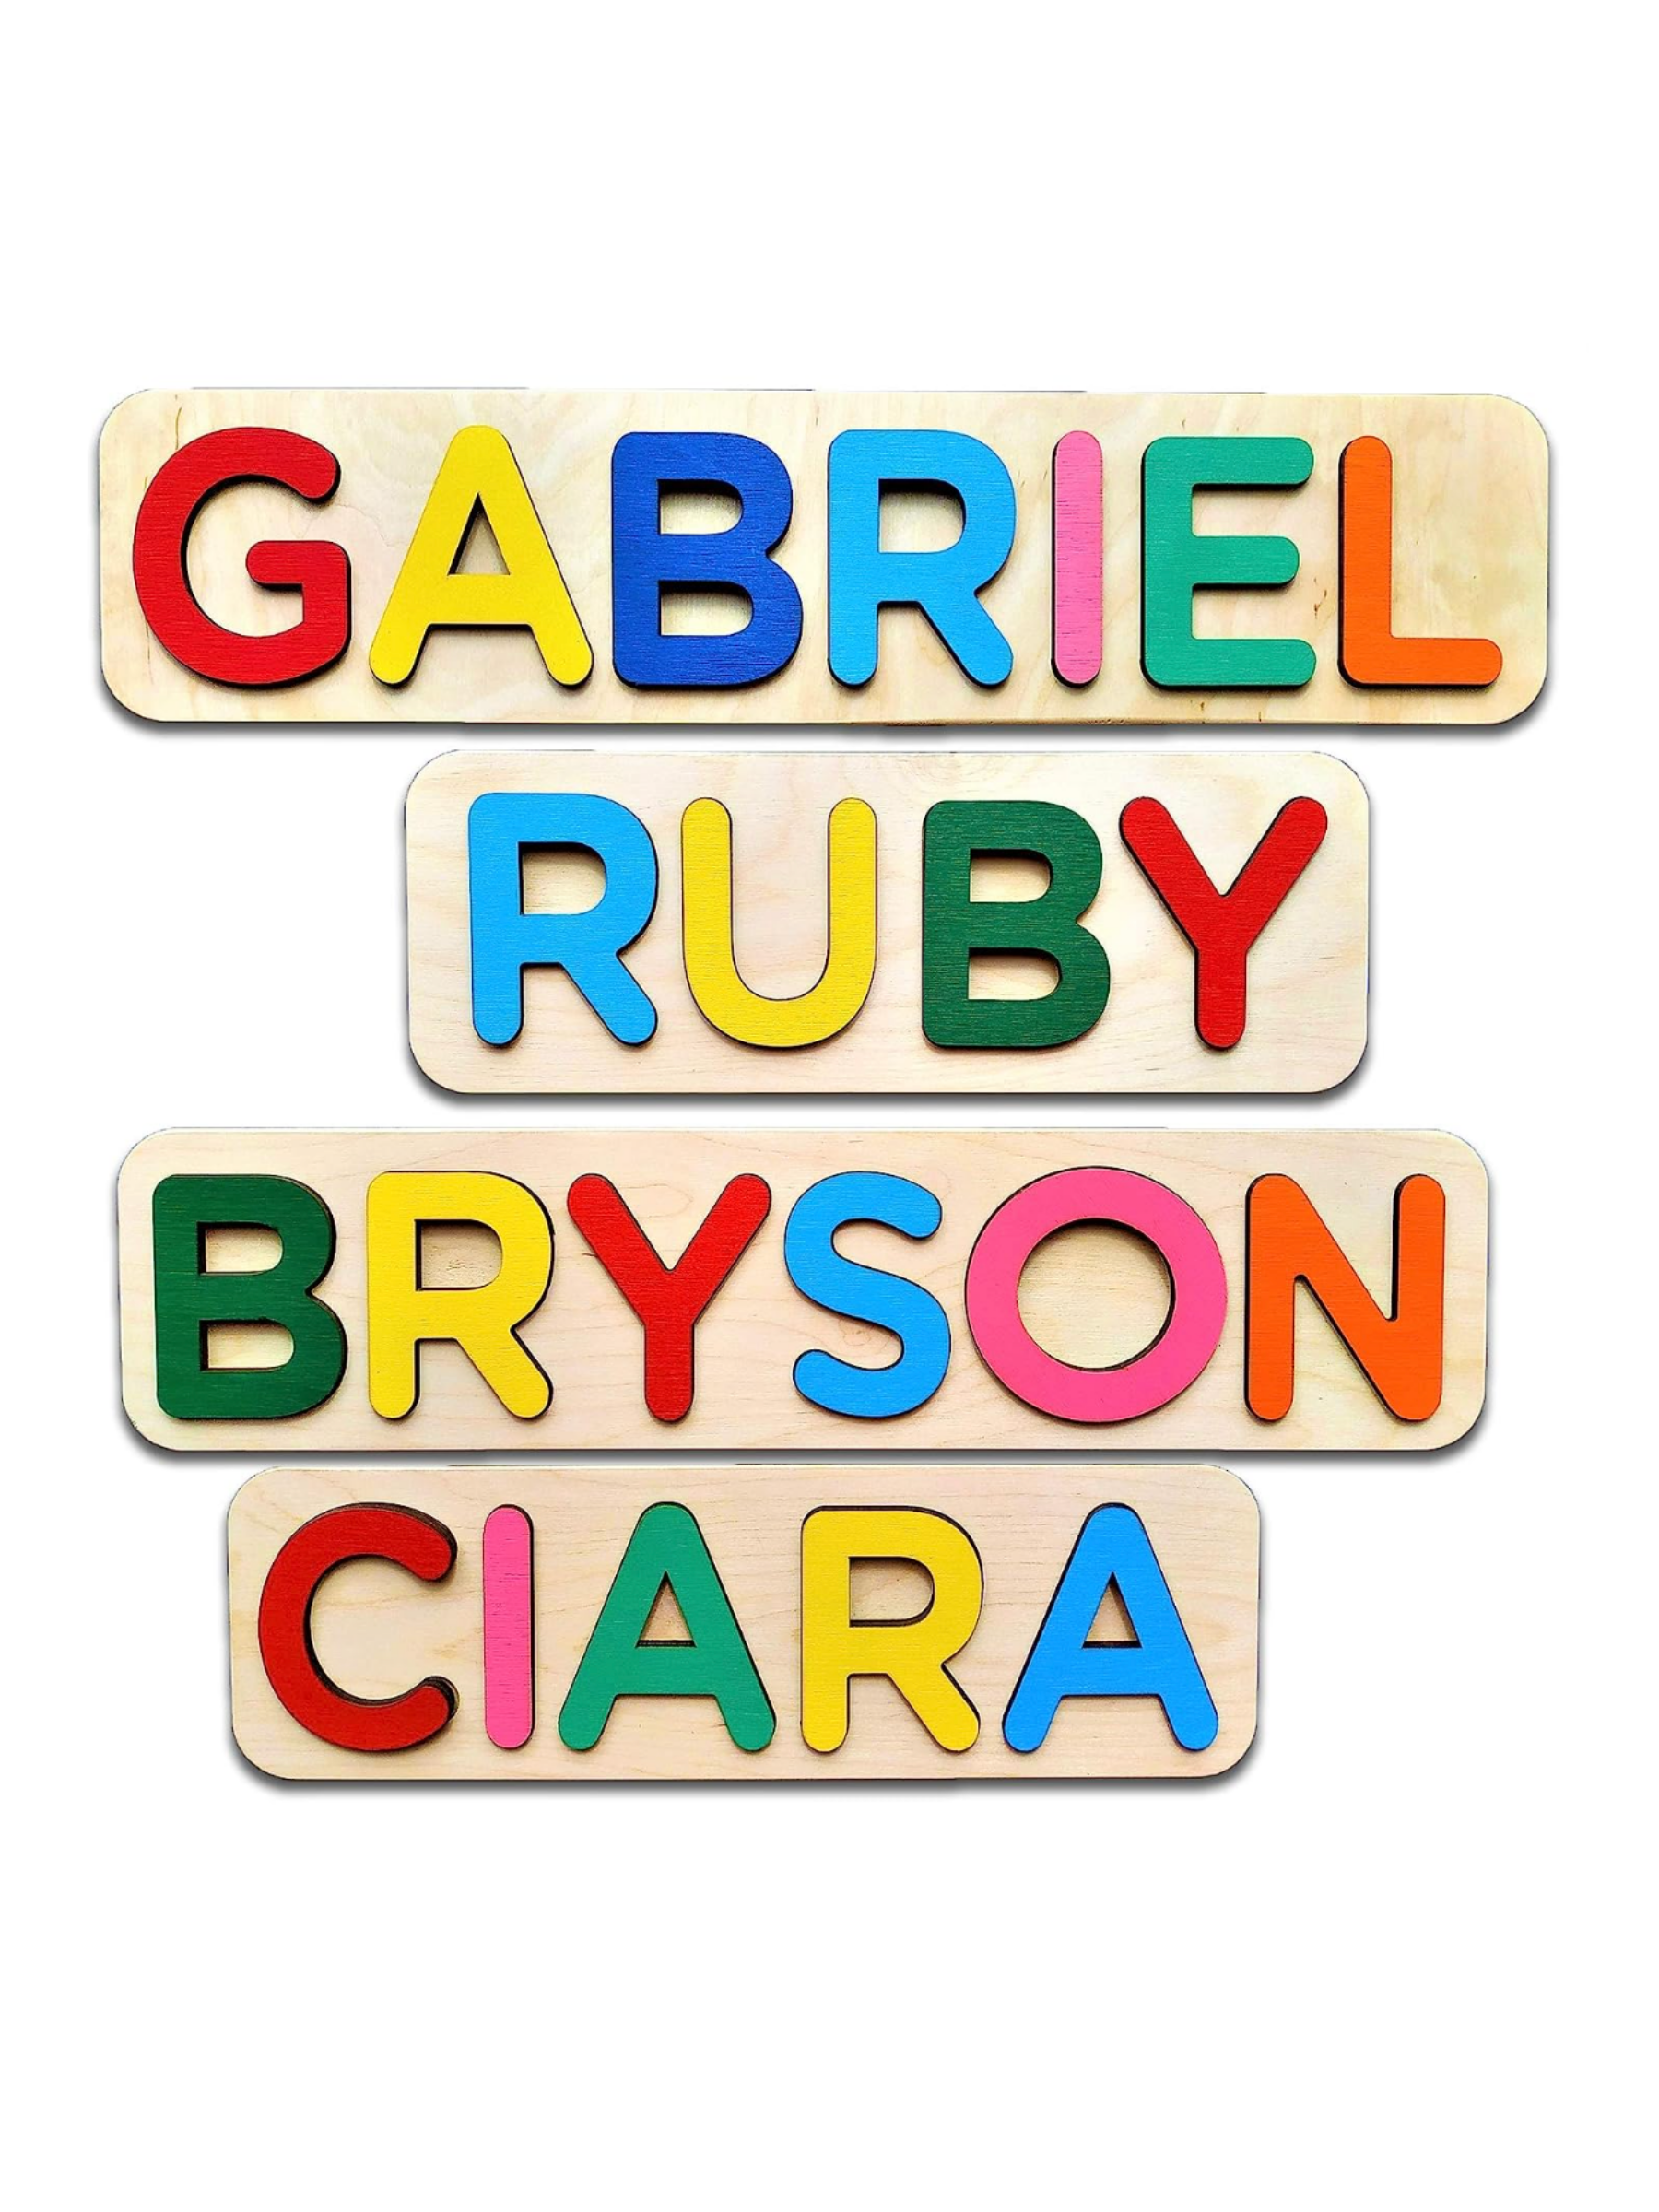 <p>On the hunt for a great birthday gift for a 1-year-old? A personalized puzzle is a fun activity that’ll help them—eventually—learn to recognize and even spell their name.</p> <p><em>Save when you shop the best gifts for toddlers with these <a href="https://www.glamour.com/coupons/amazon?mbid=synd_msn_rss&utm_source=msn&utm_medium=syndication">Amazon promo codes</a>.</em></p> $14, Amazon. <a href="https://www.amazon.com/Wooden-Personalized-Engraved-Greetings-Handmade/dp/B07PLM88F7">Get it now!</a><p>Sign up for today’s biggest stories, from pop culture to politics.</p><a href="https://www.glamour.com/newsletter/news?sourceCode=msnsend">Sign Up</a>